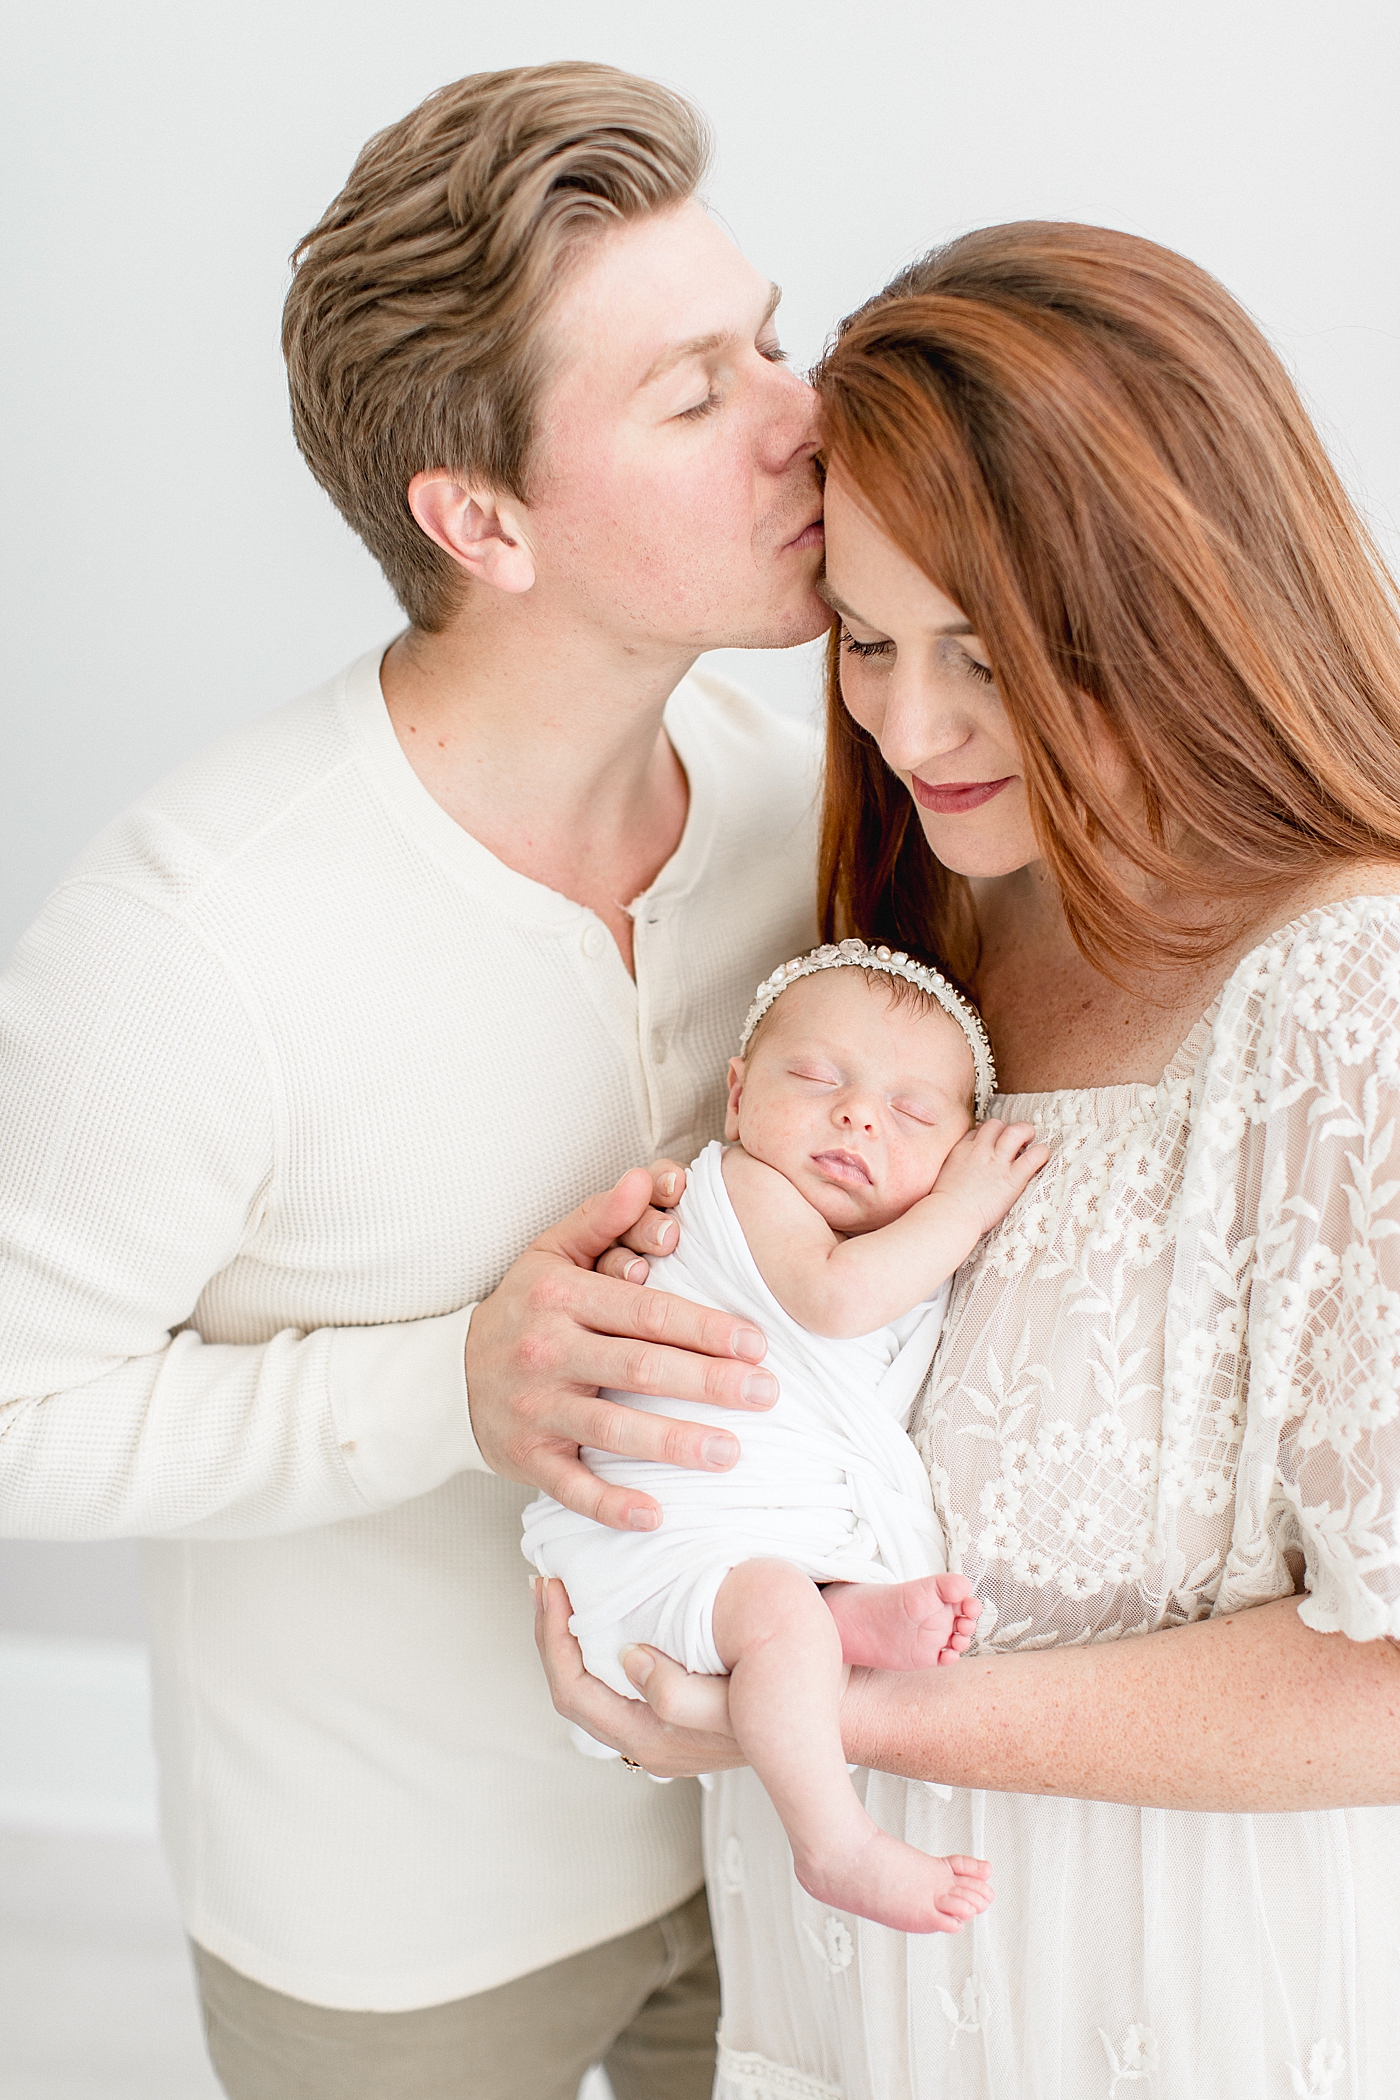 Dad kissing Mom on the. forehead while she holds their newborn daughter. Photo by Brittany Elise Photography.